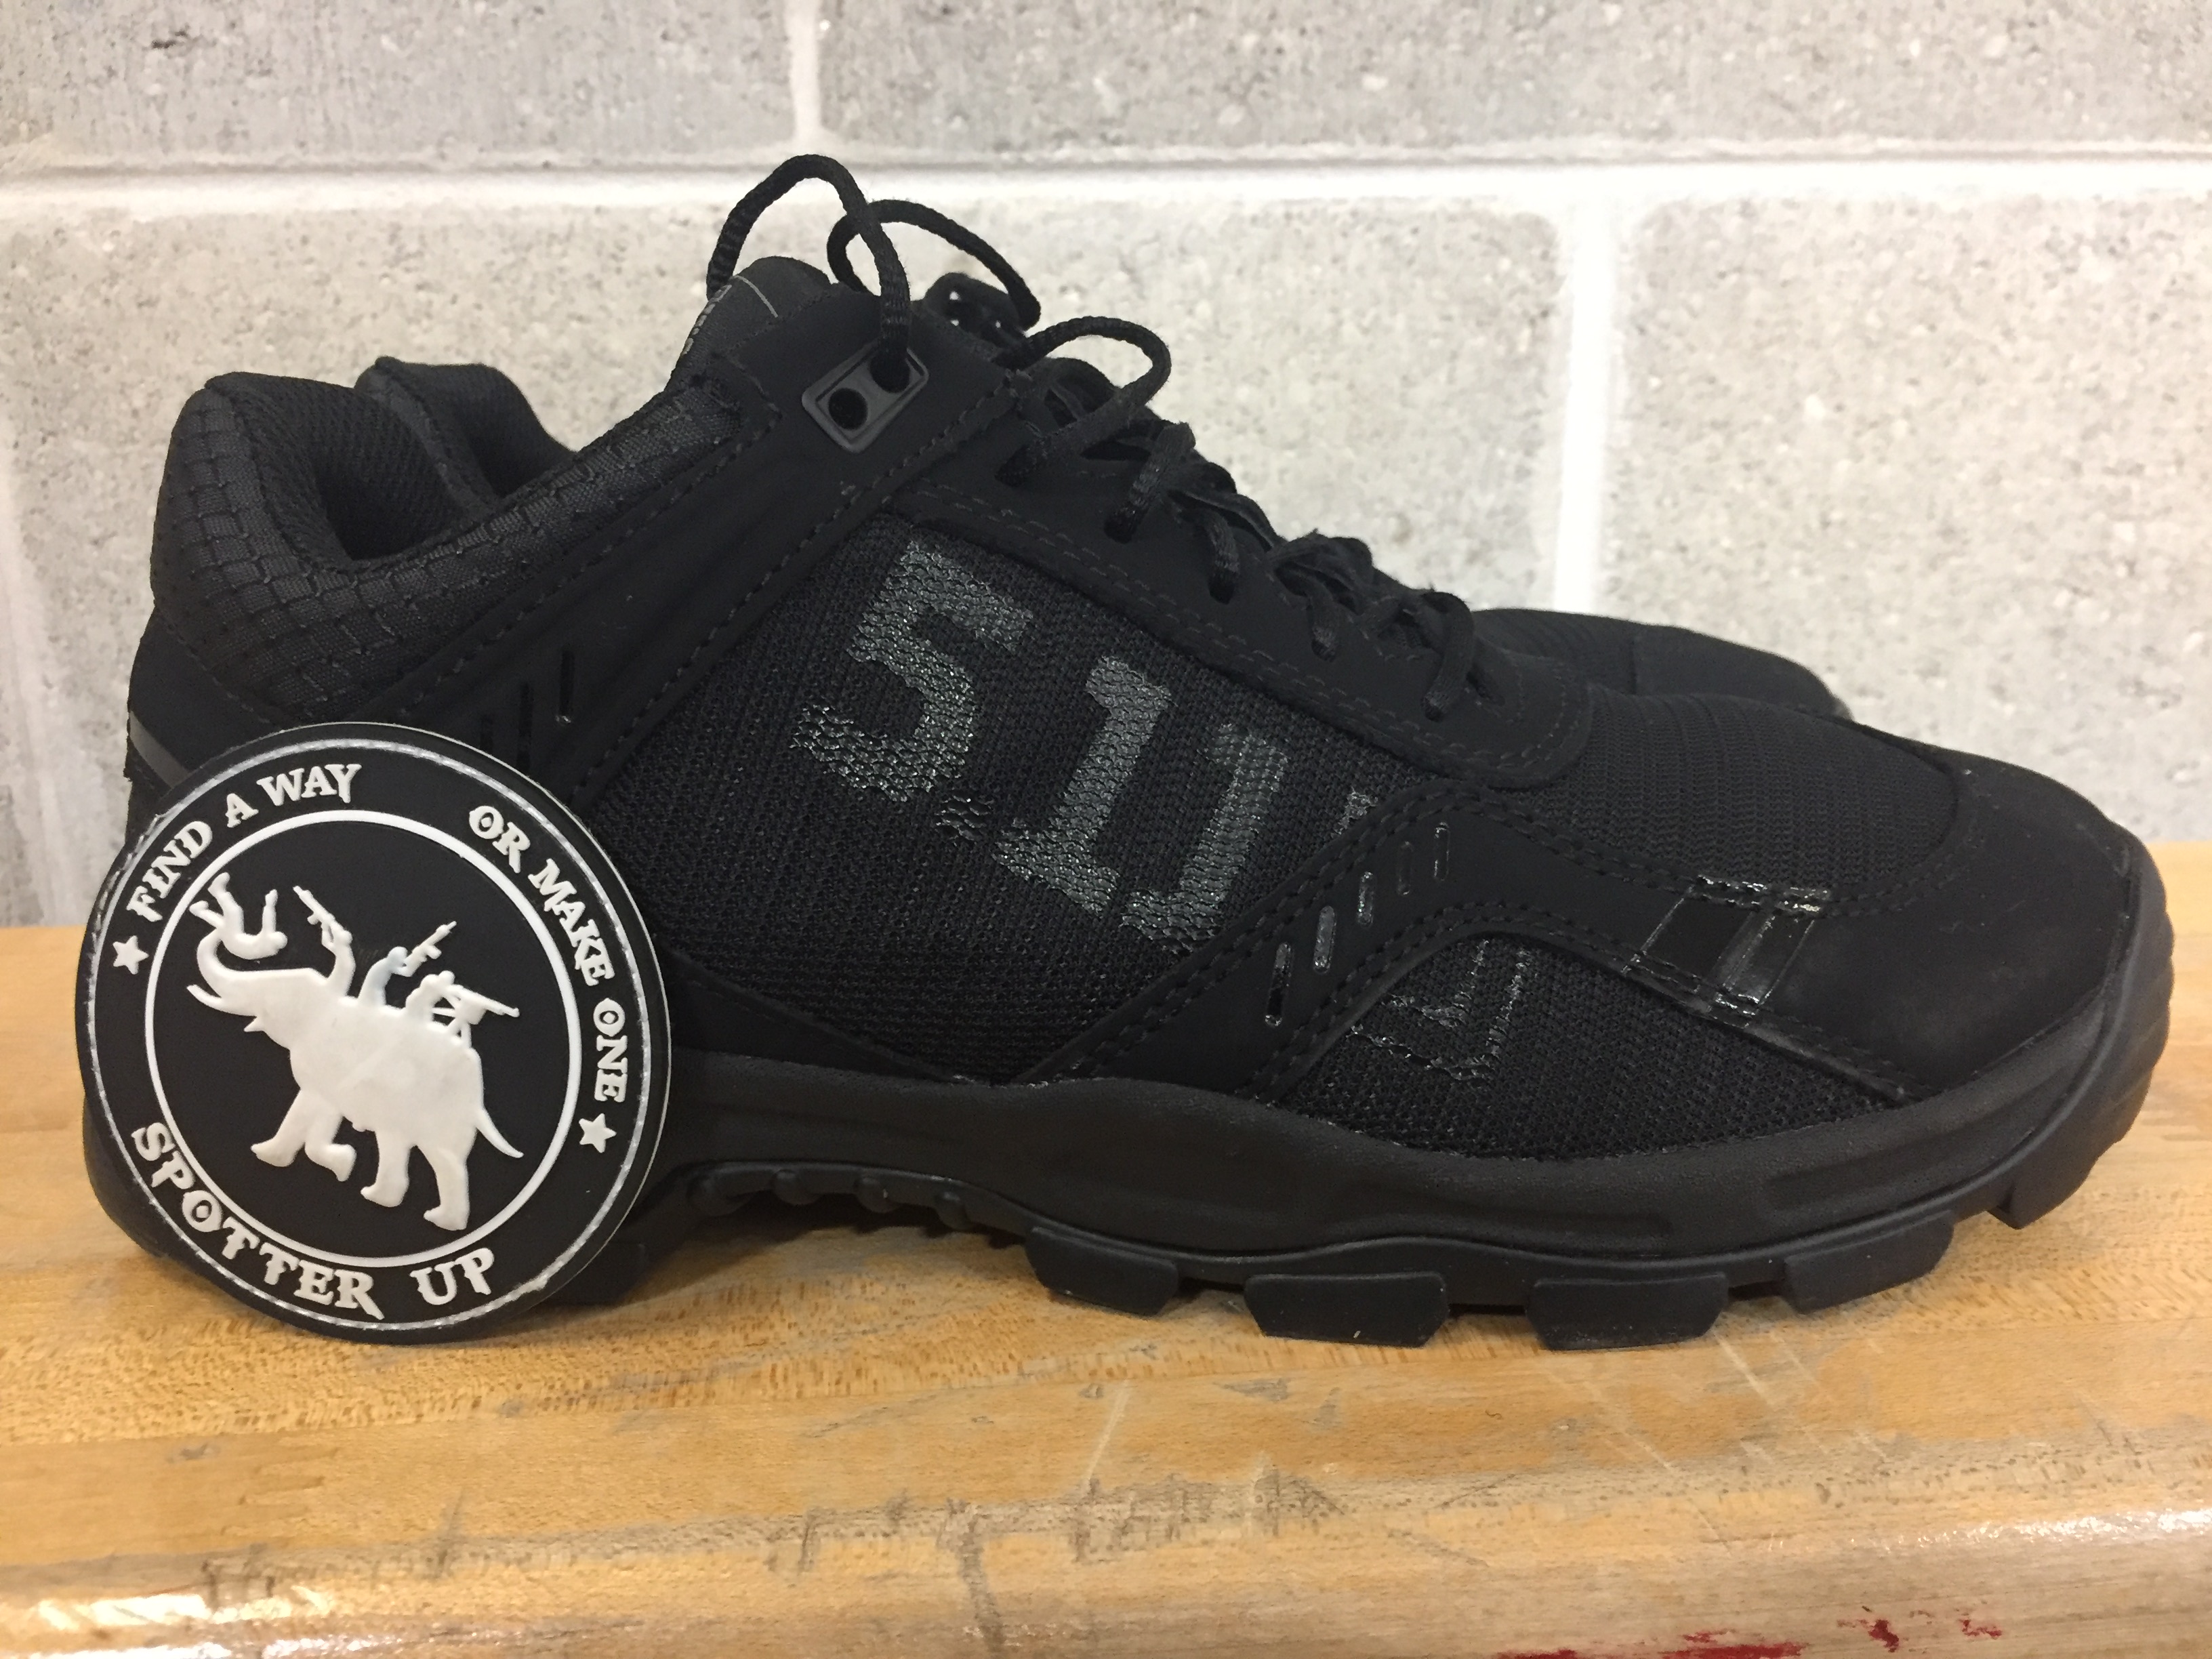 RLTW – in cool shoes. The 5.11 Ranger 